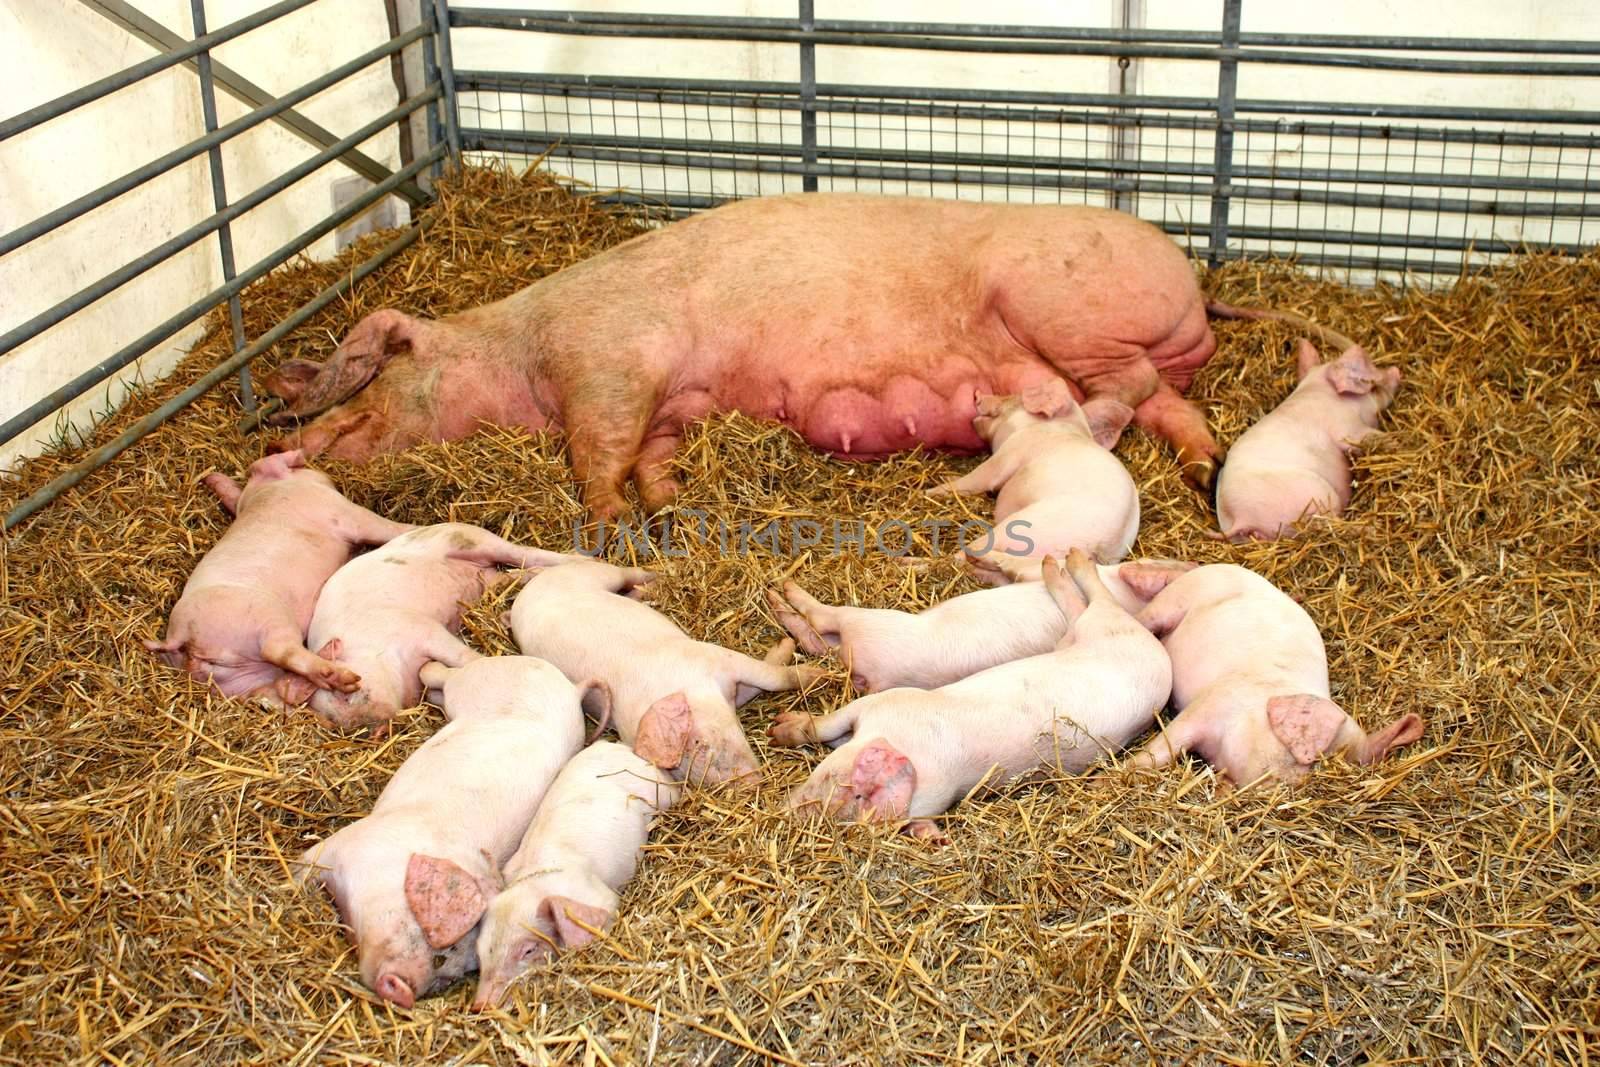 A Mother Pig with her Piglets on a Bed of Straw.